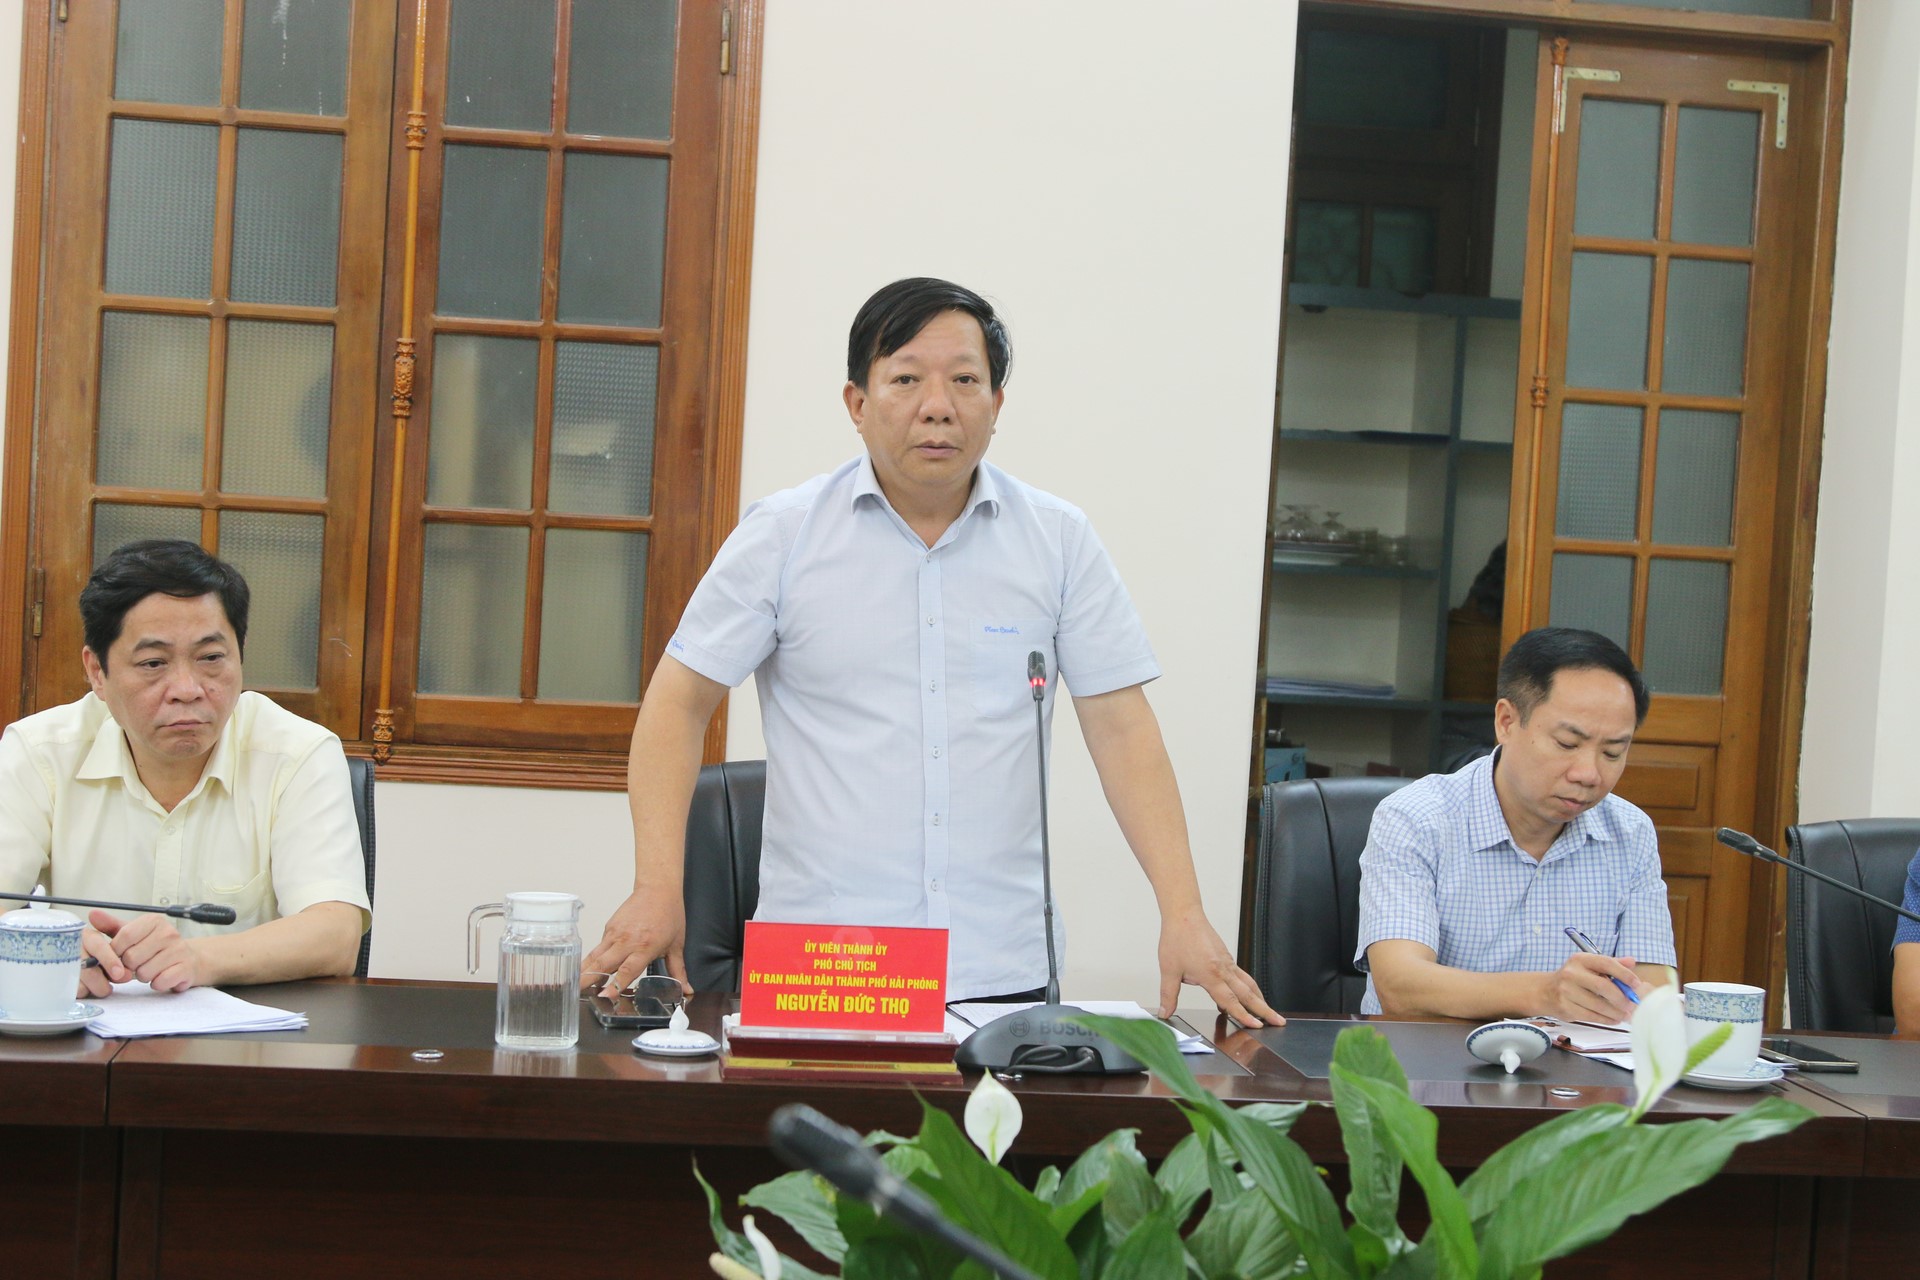 Mr. Nguyen Duc Tho, Vice Chairman of the Hai Phong City People's Committee, received directions from MARD’s leaders at the meeting. Photo: Dinh Muoi.